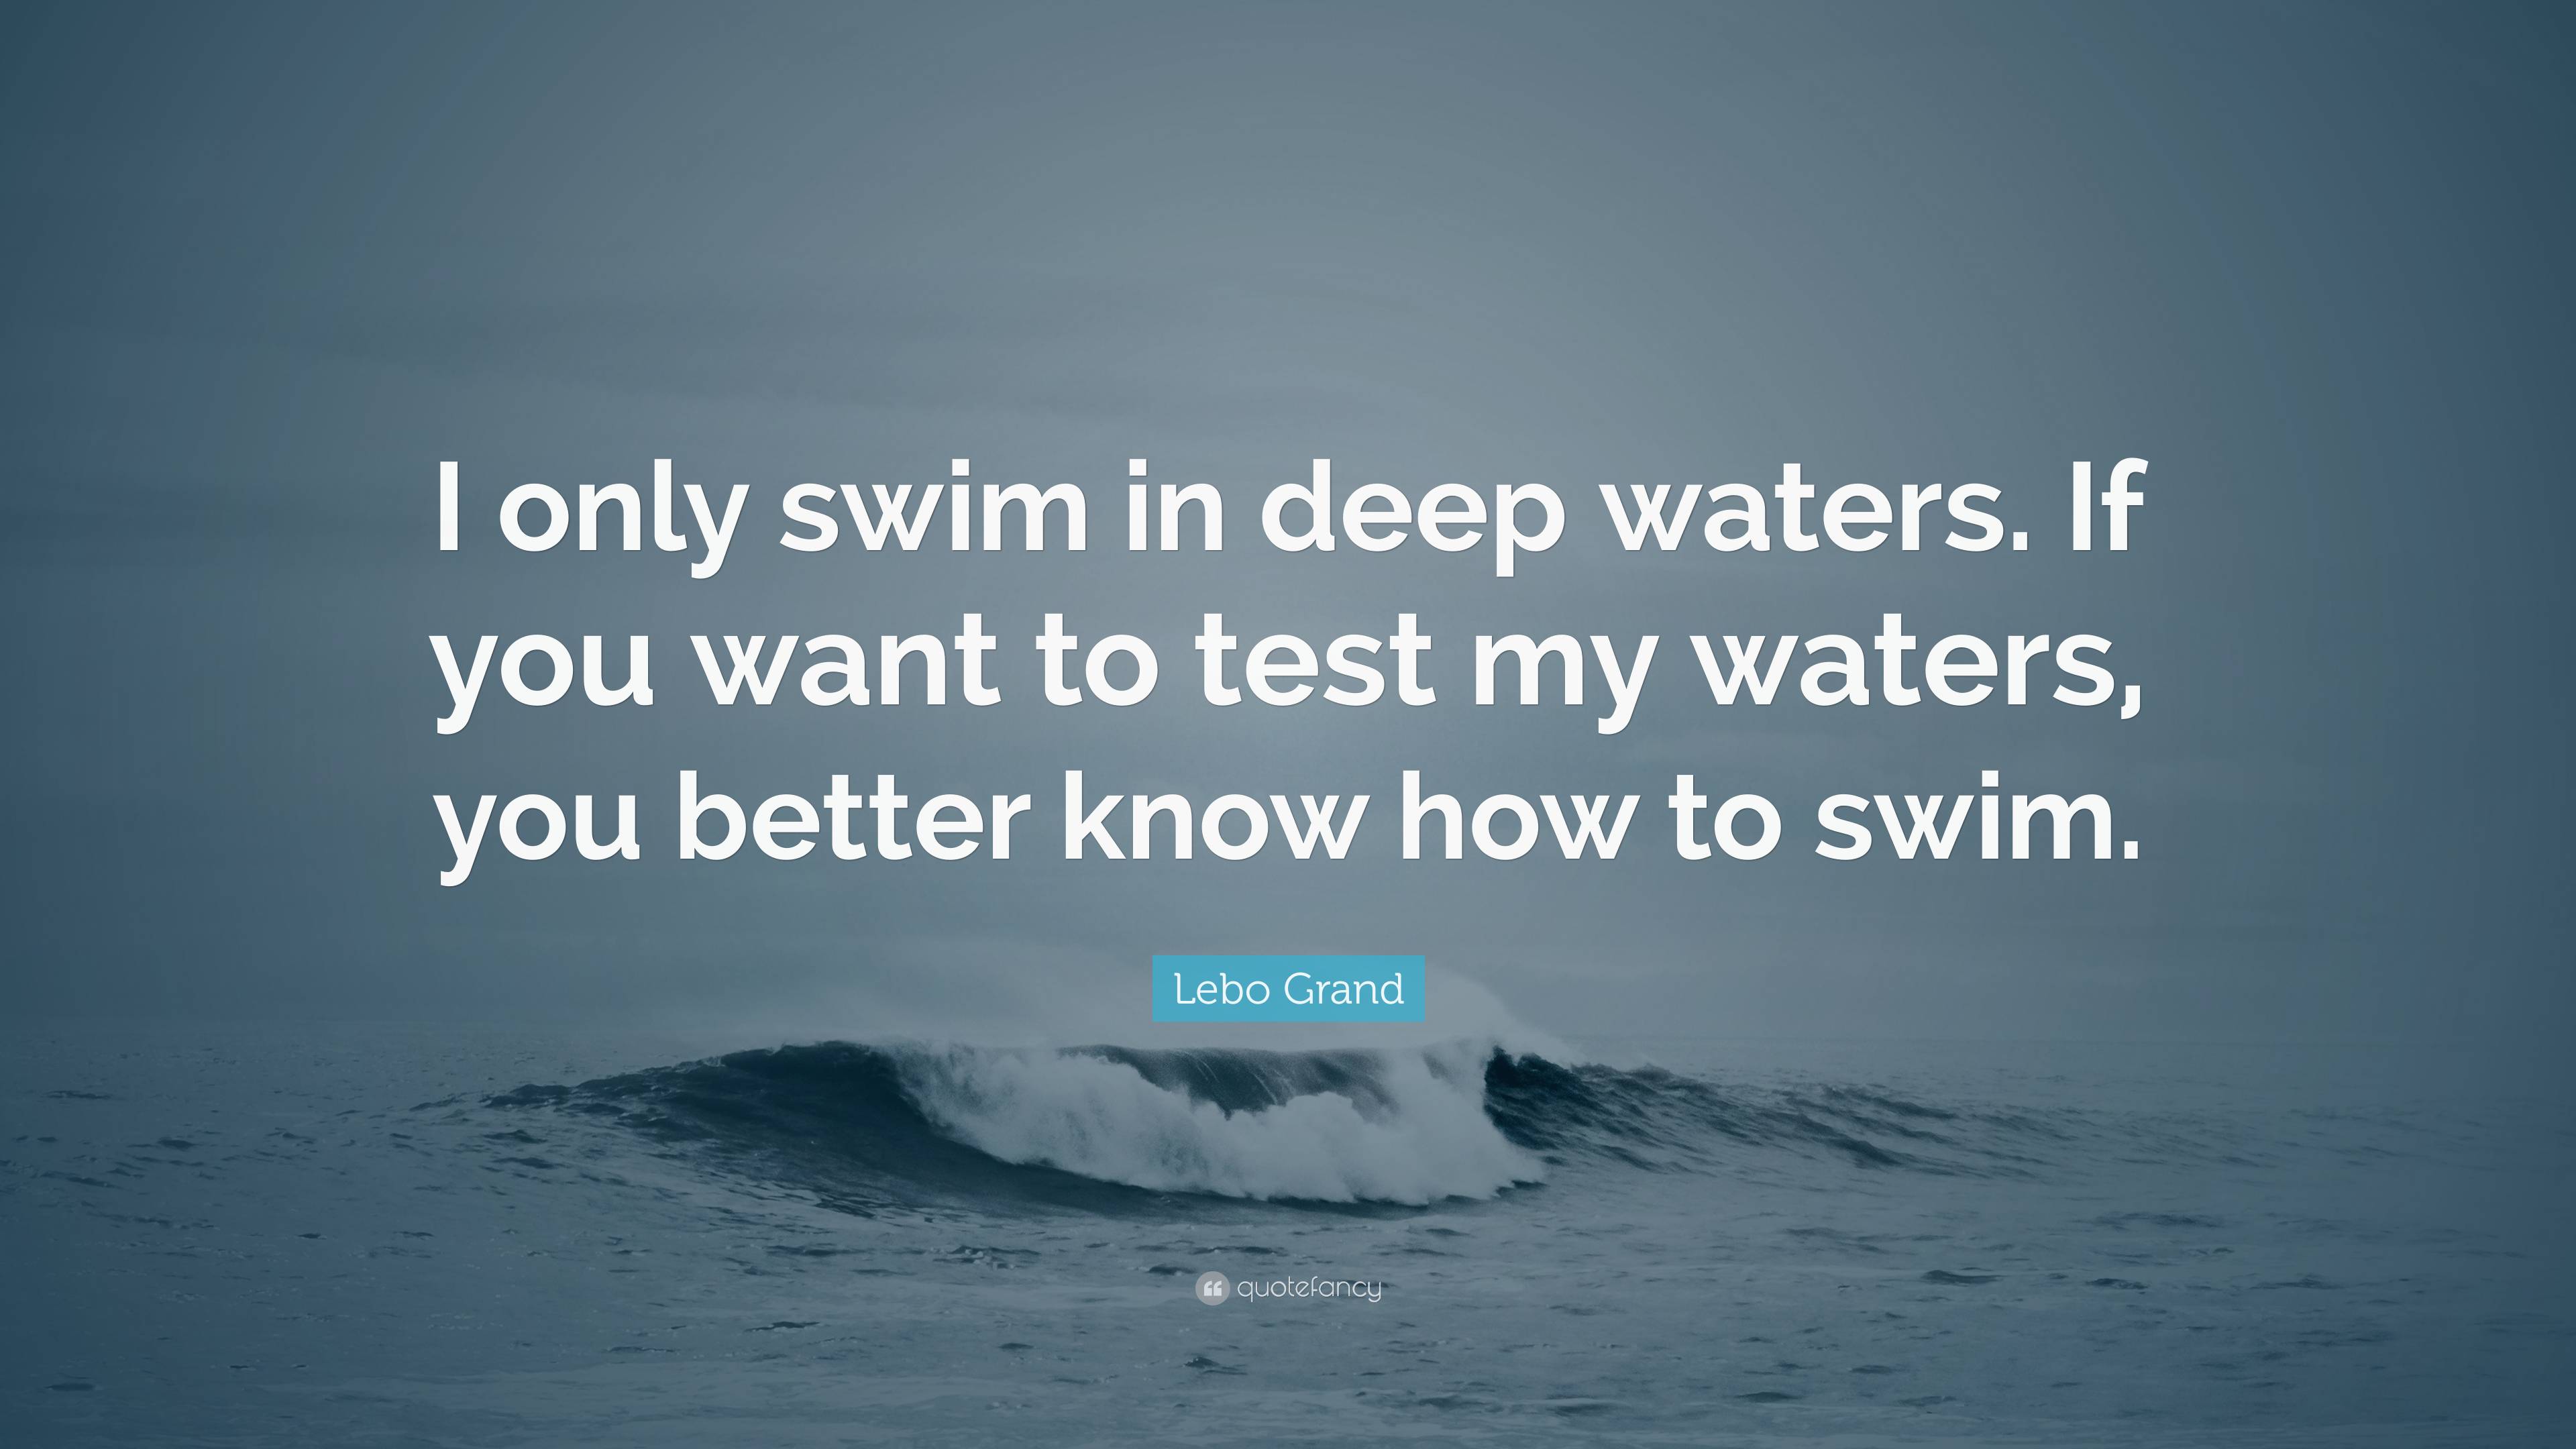 https://quotefancy.com/media/wallpaper/3840x2160/7301469-Lebo-Grand-Quote-I-only-swim-in-deep-waters-If-you-want-to-test-my.jpg